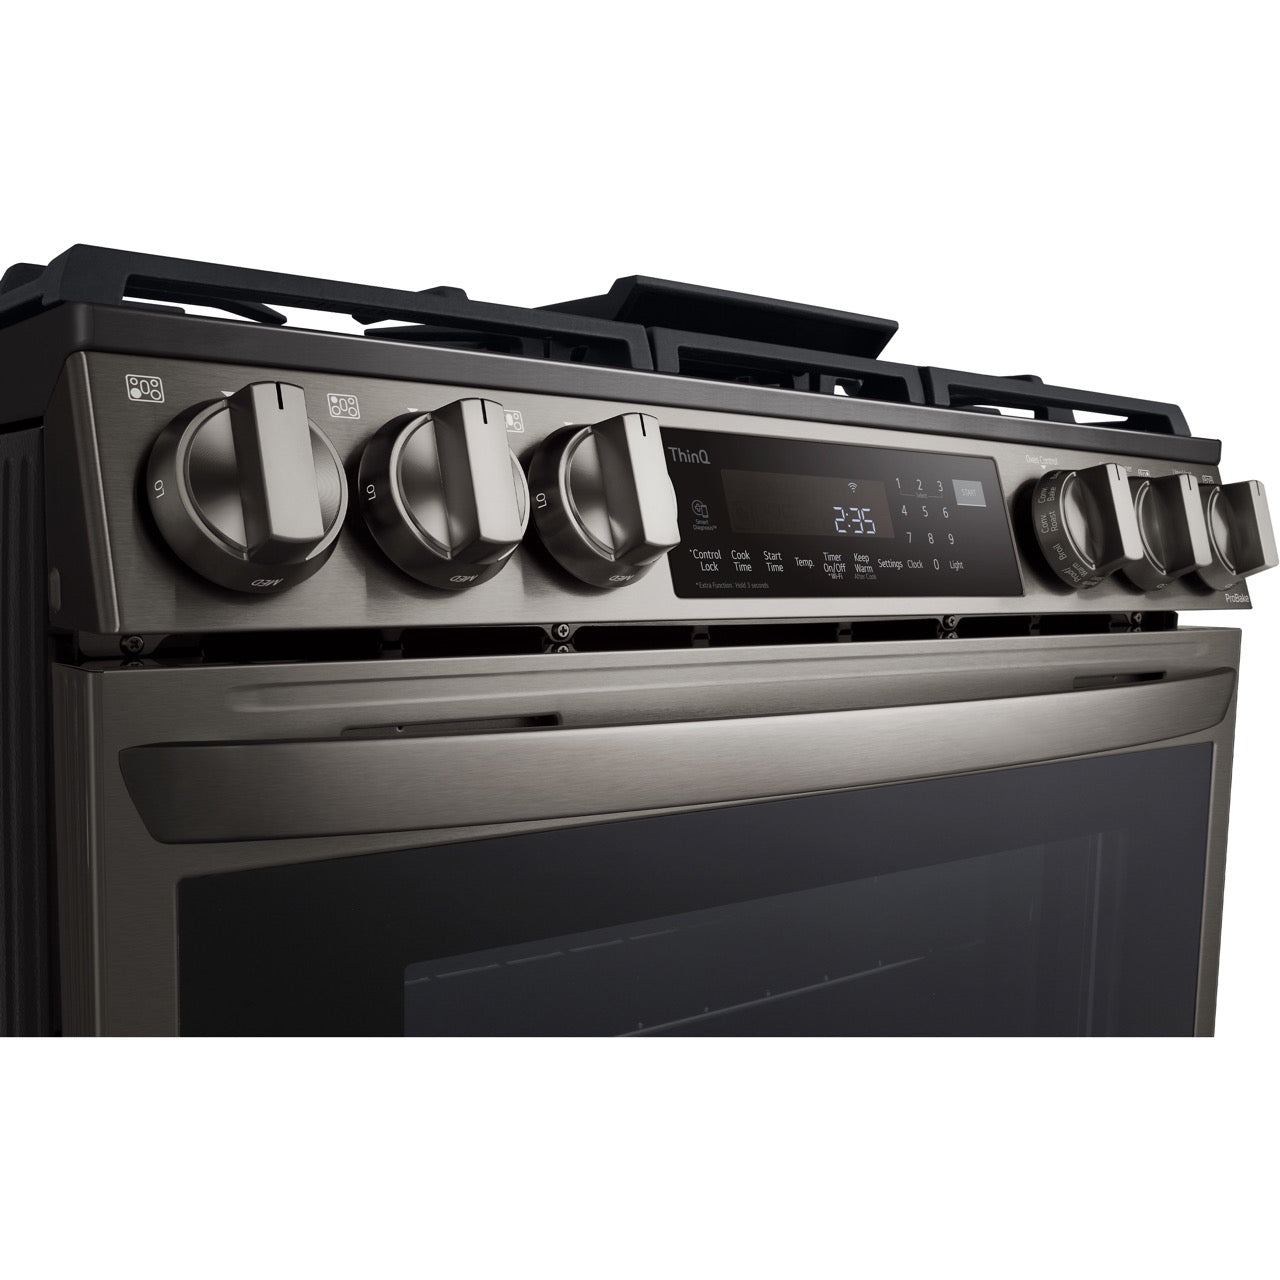 LG 6.3-Cu. Ft. Smart Wi-Fi Enabled ProBake Convection InstaView Gas Slide-in Range with Air Fry, Black Stainless Steel (LSGL6335D)